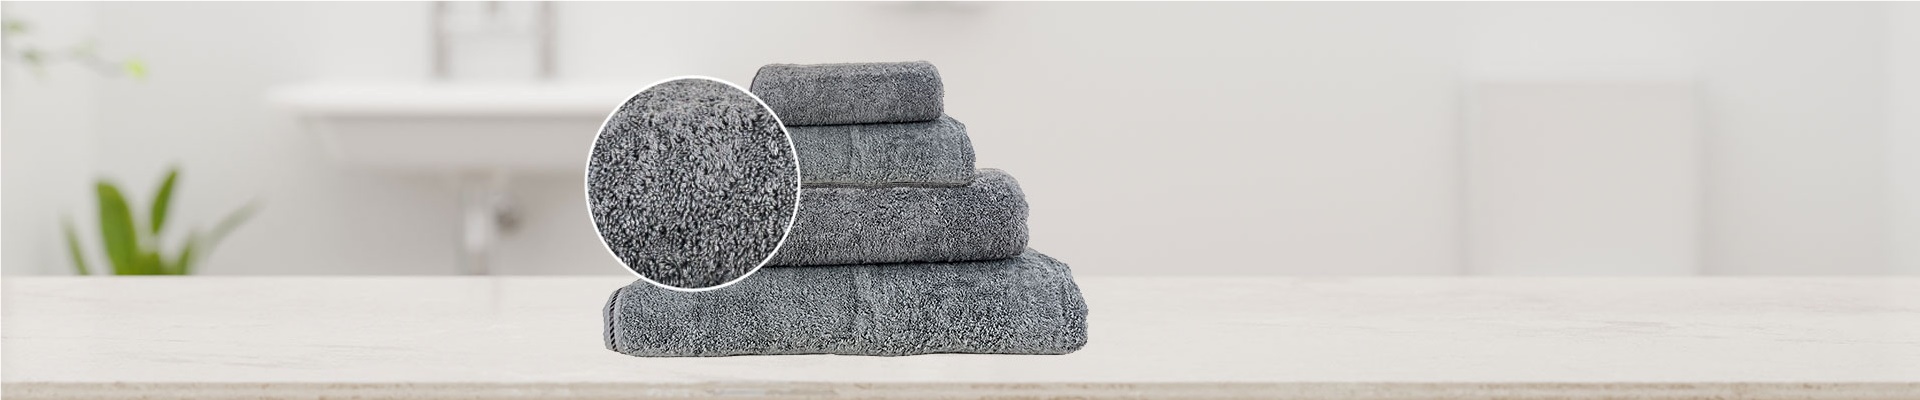 Soft terry towels - available in a range of different sizes and colours